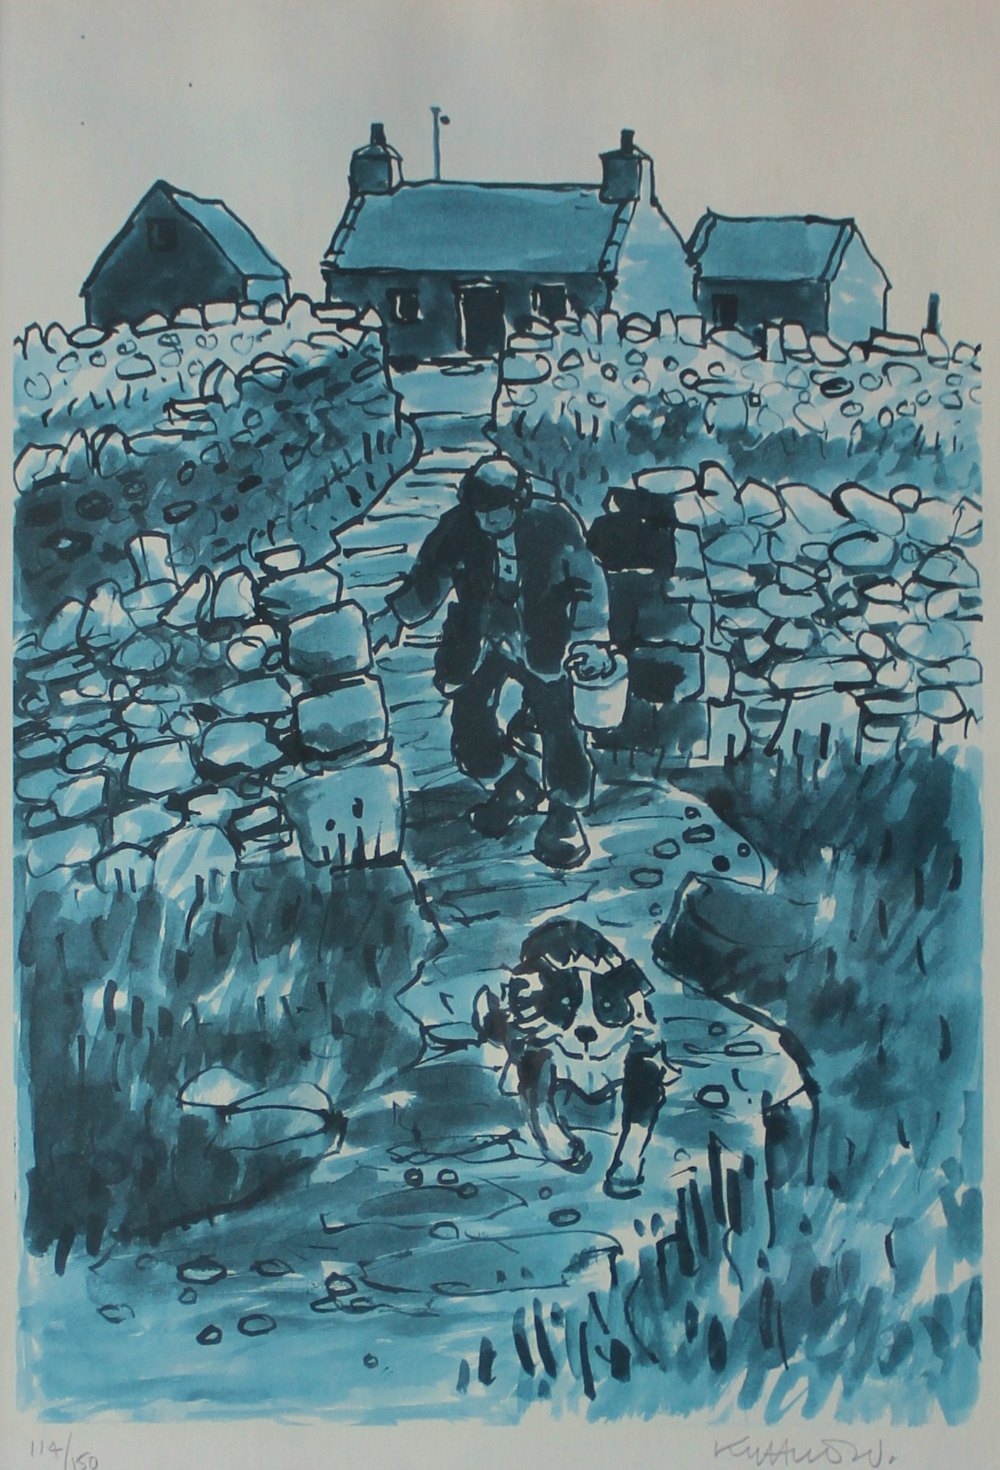 Kyffin Williams A farmer and sheepdog on a path A limited edition print No.114/150 Signed in